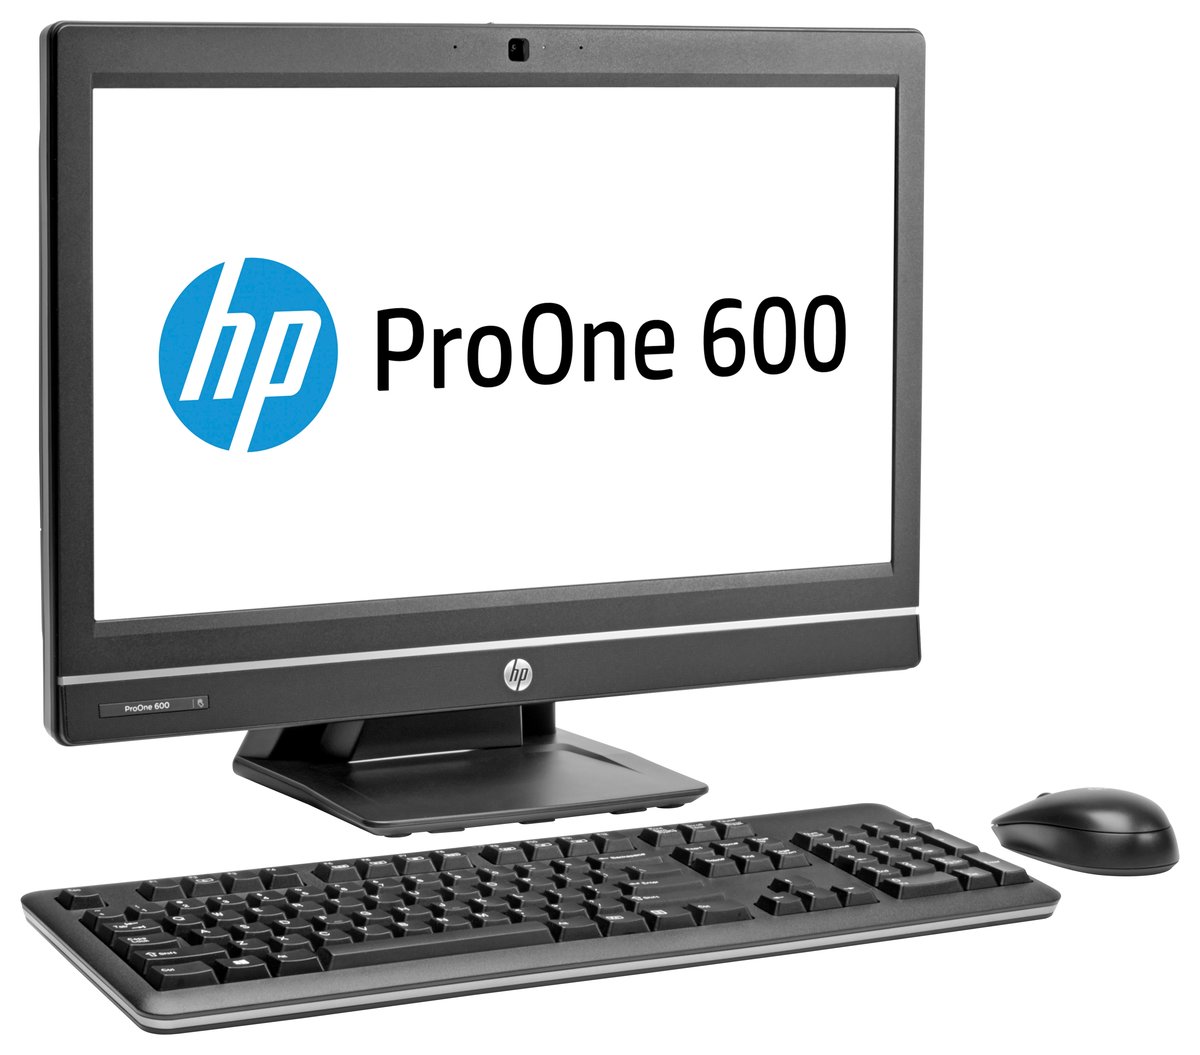 HP ProOne 600 G1 All-in-One